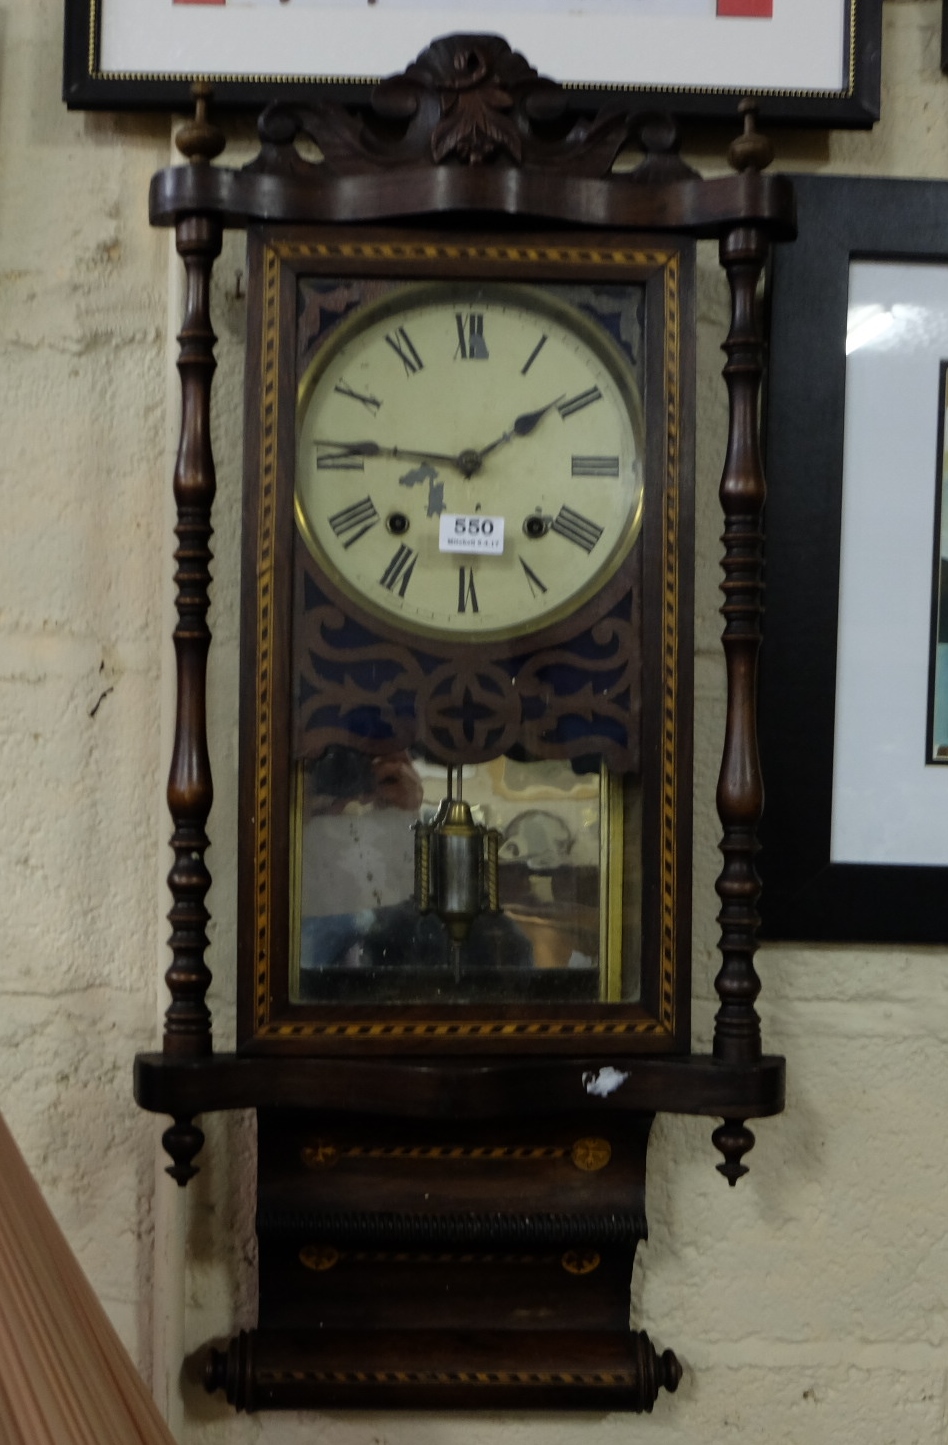 8-Day Wall Clock in a rectangular shaped frame, with mirror back, inlaid with multiple woods,